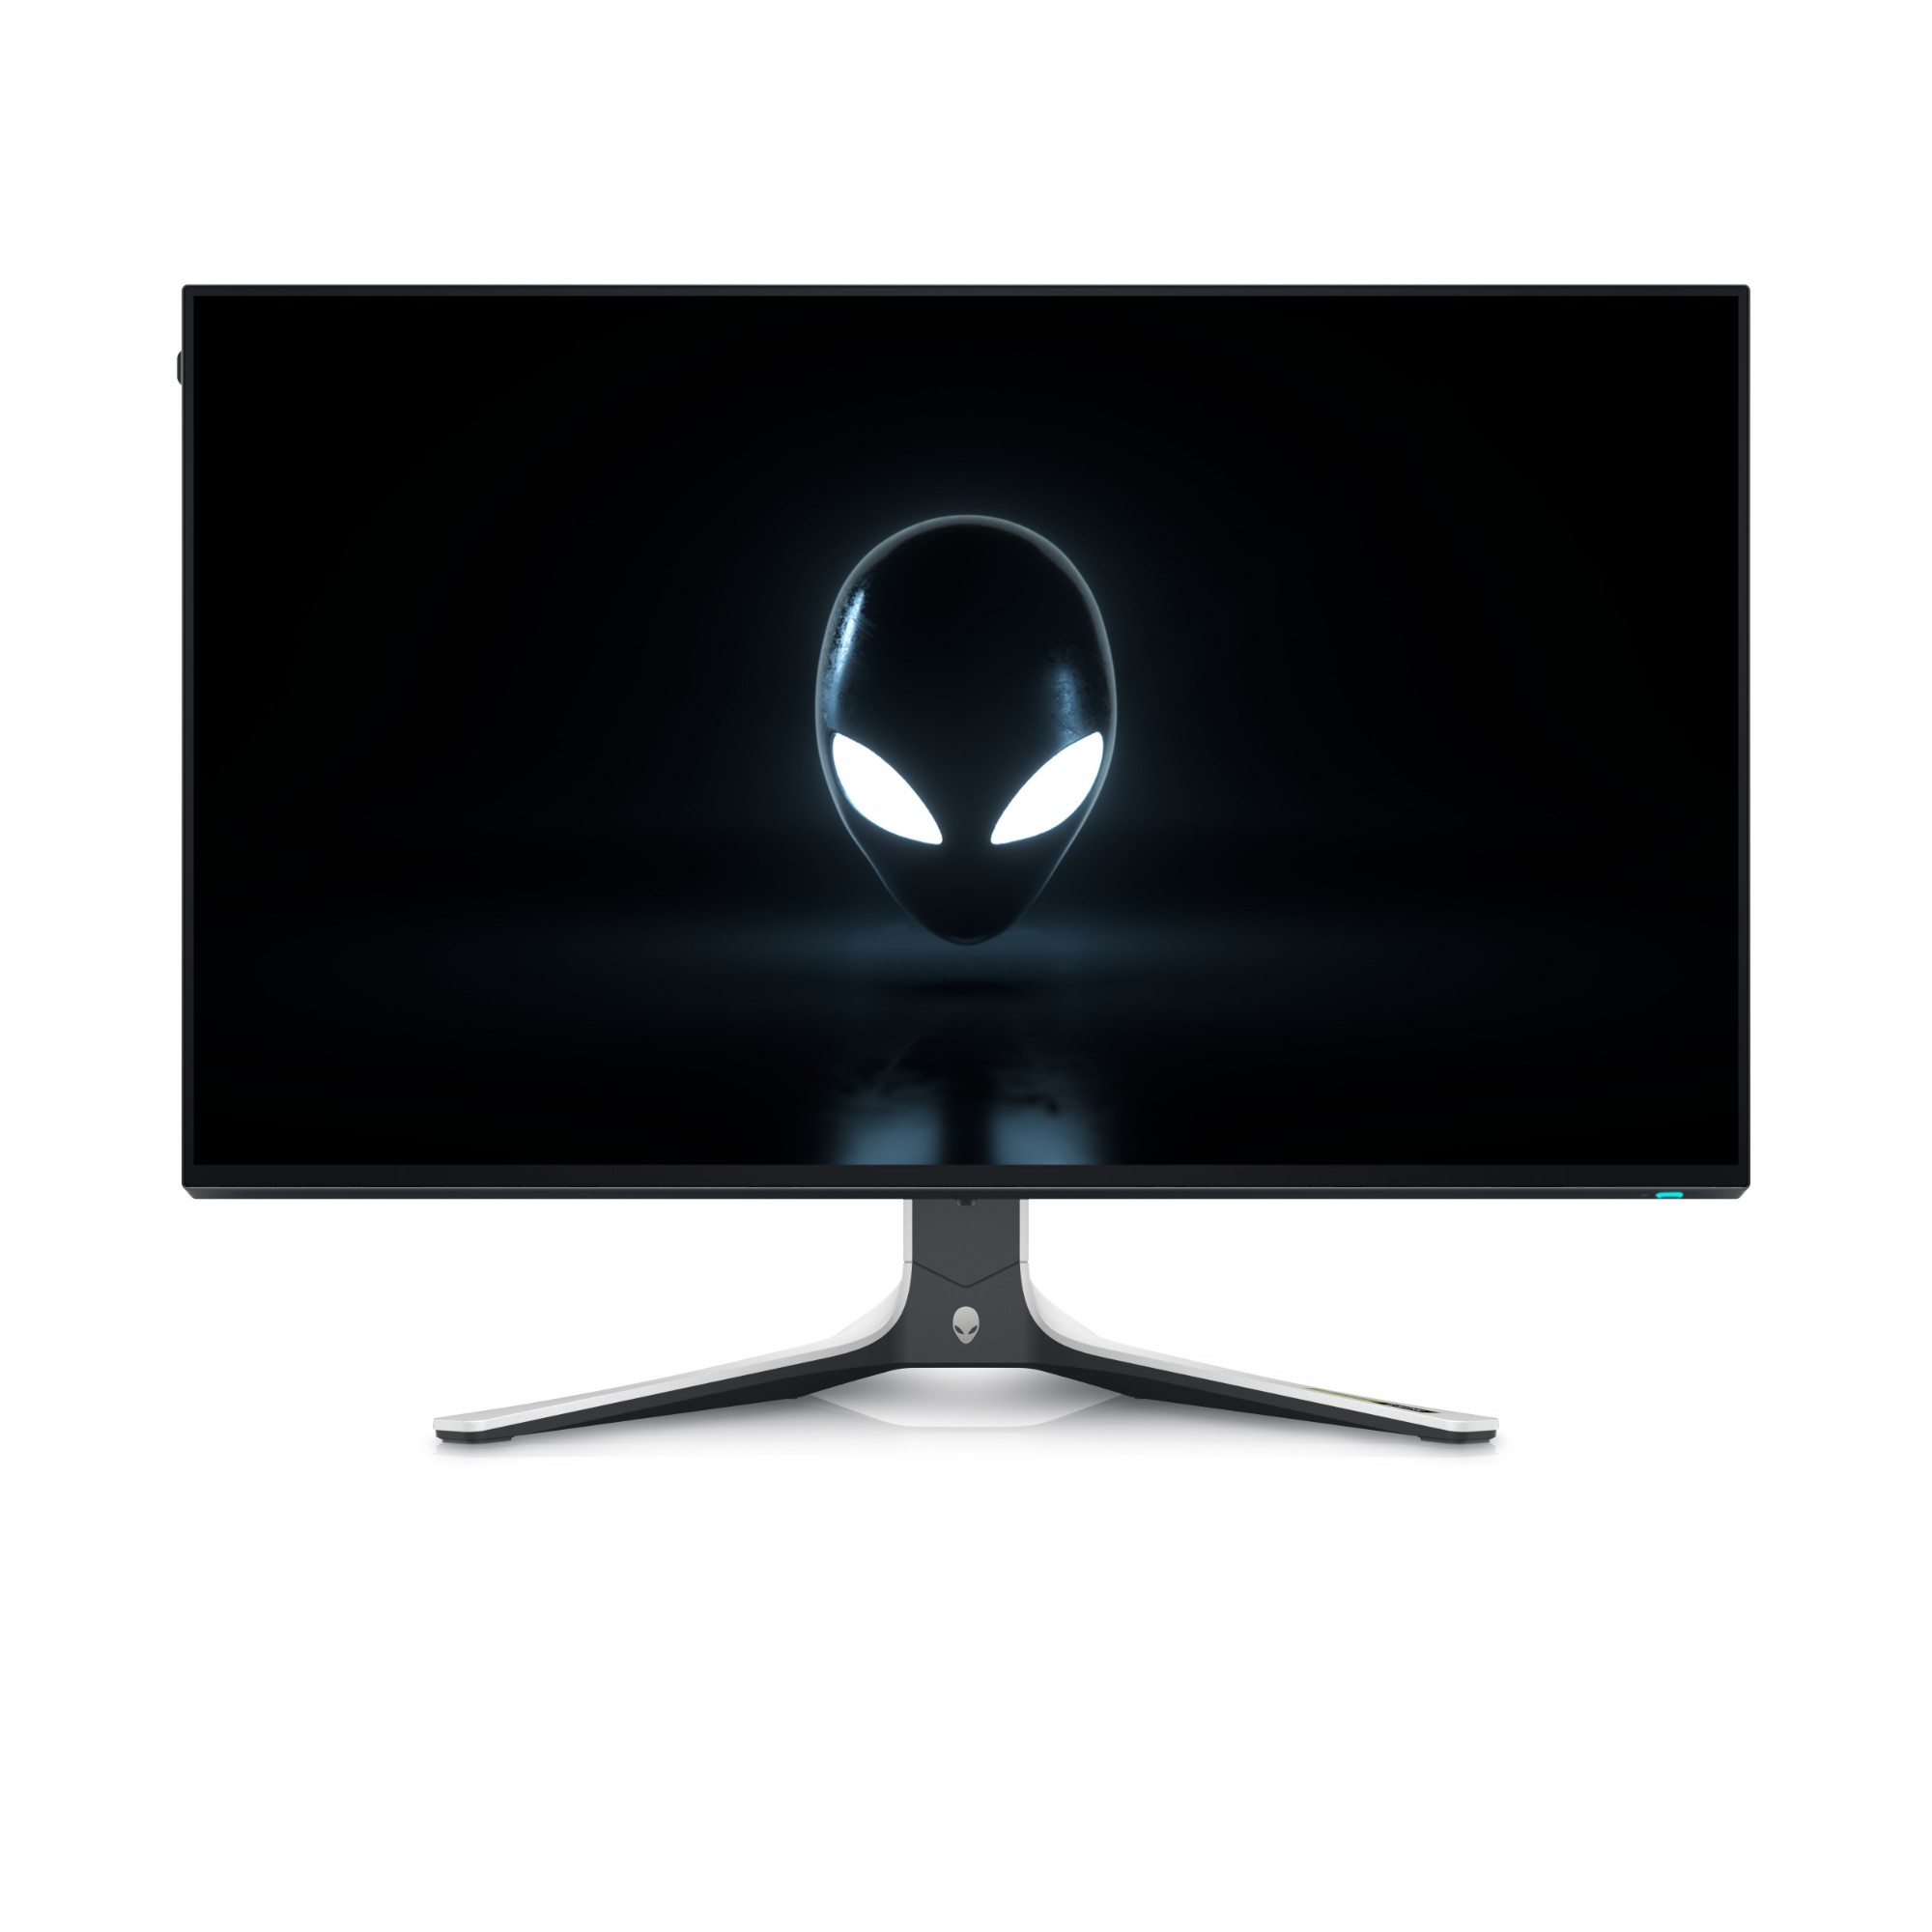 GAME-AW2723DF DELL Alienware 27 Gaming Monitor - AW2723DF - 68.47cm - Flat Screen - 68.47 cm